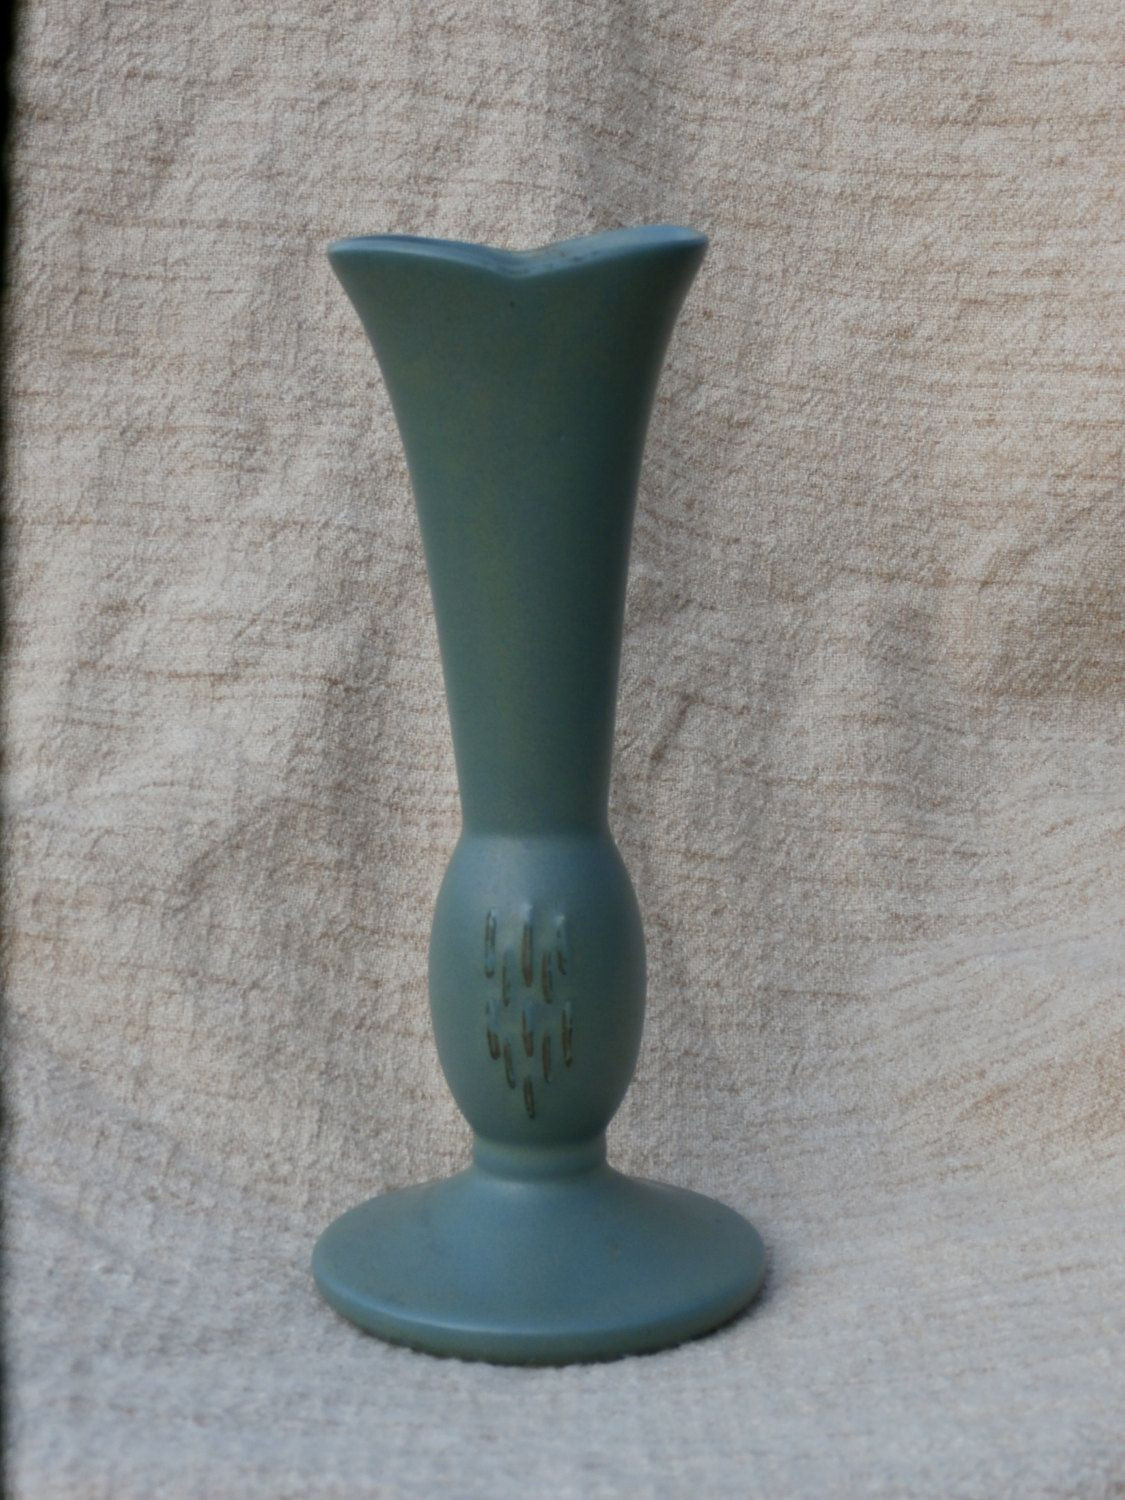 20 Trendy Vintage Italian Pottery Vase 2022 free download vintage italian pottery vase of vintage green vase collection sage green pottery bud vase vintage throughout sage green pottery bud vase vintage unknown to me by